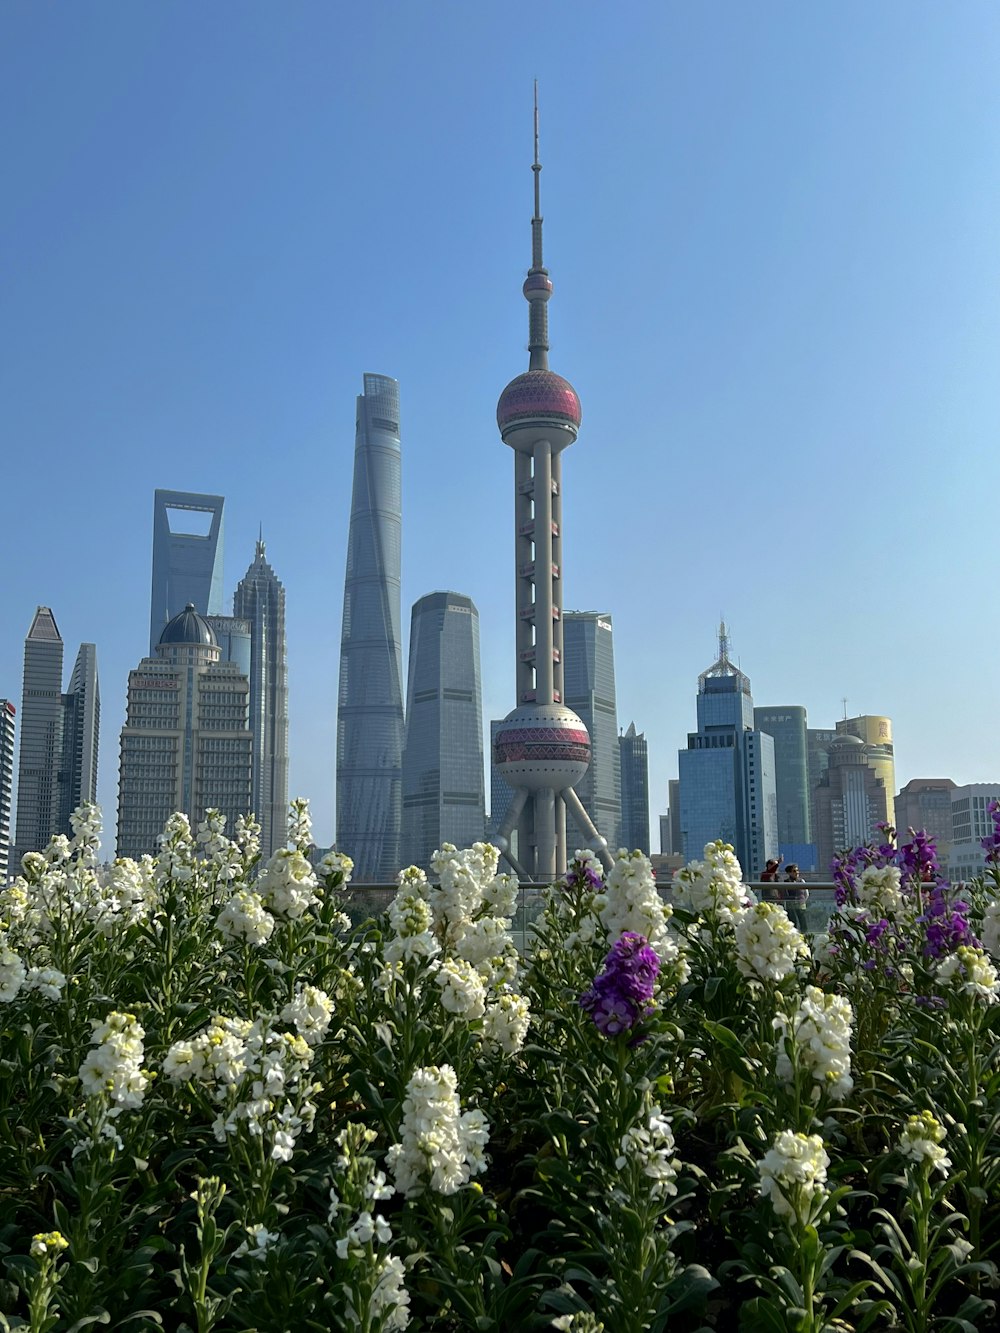 a view of a city with tall buildings and flowers in the foreground